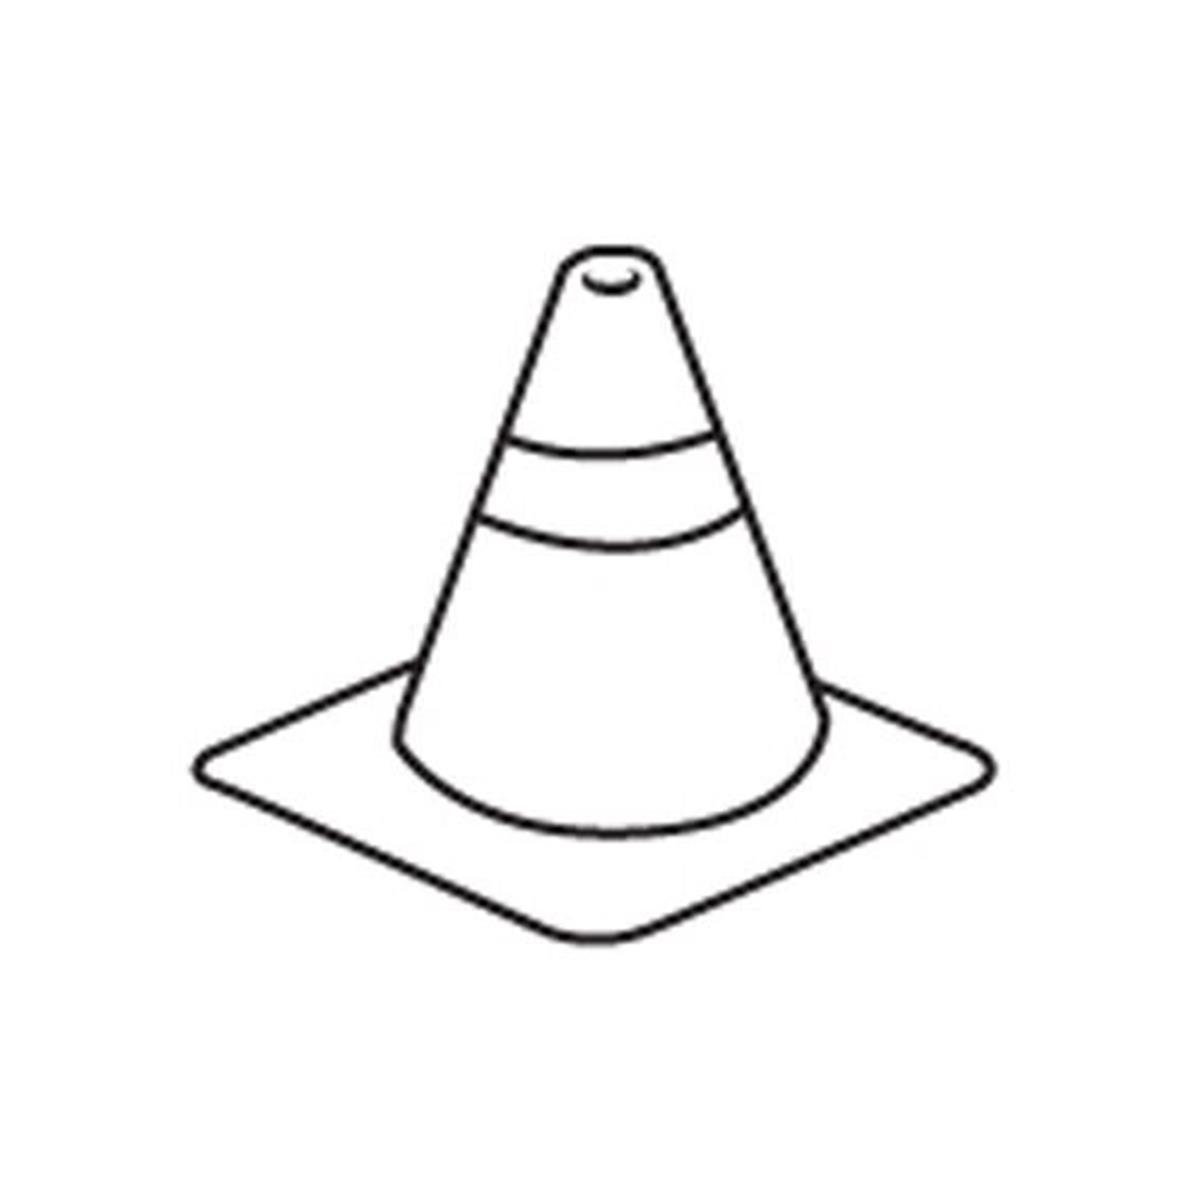 Picture of Creative Shapes Etc SE-0417 0.5 x 0.5 in. Incentive Stamp - Construction Cone